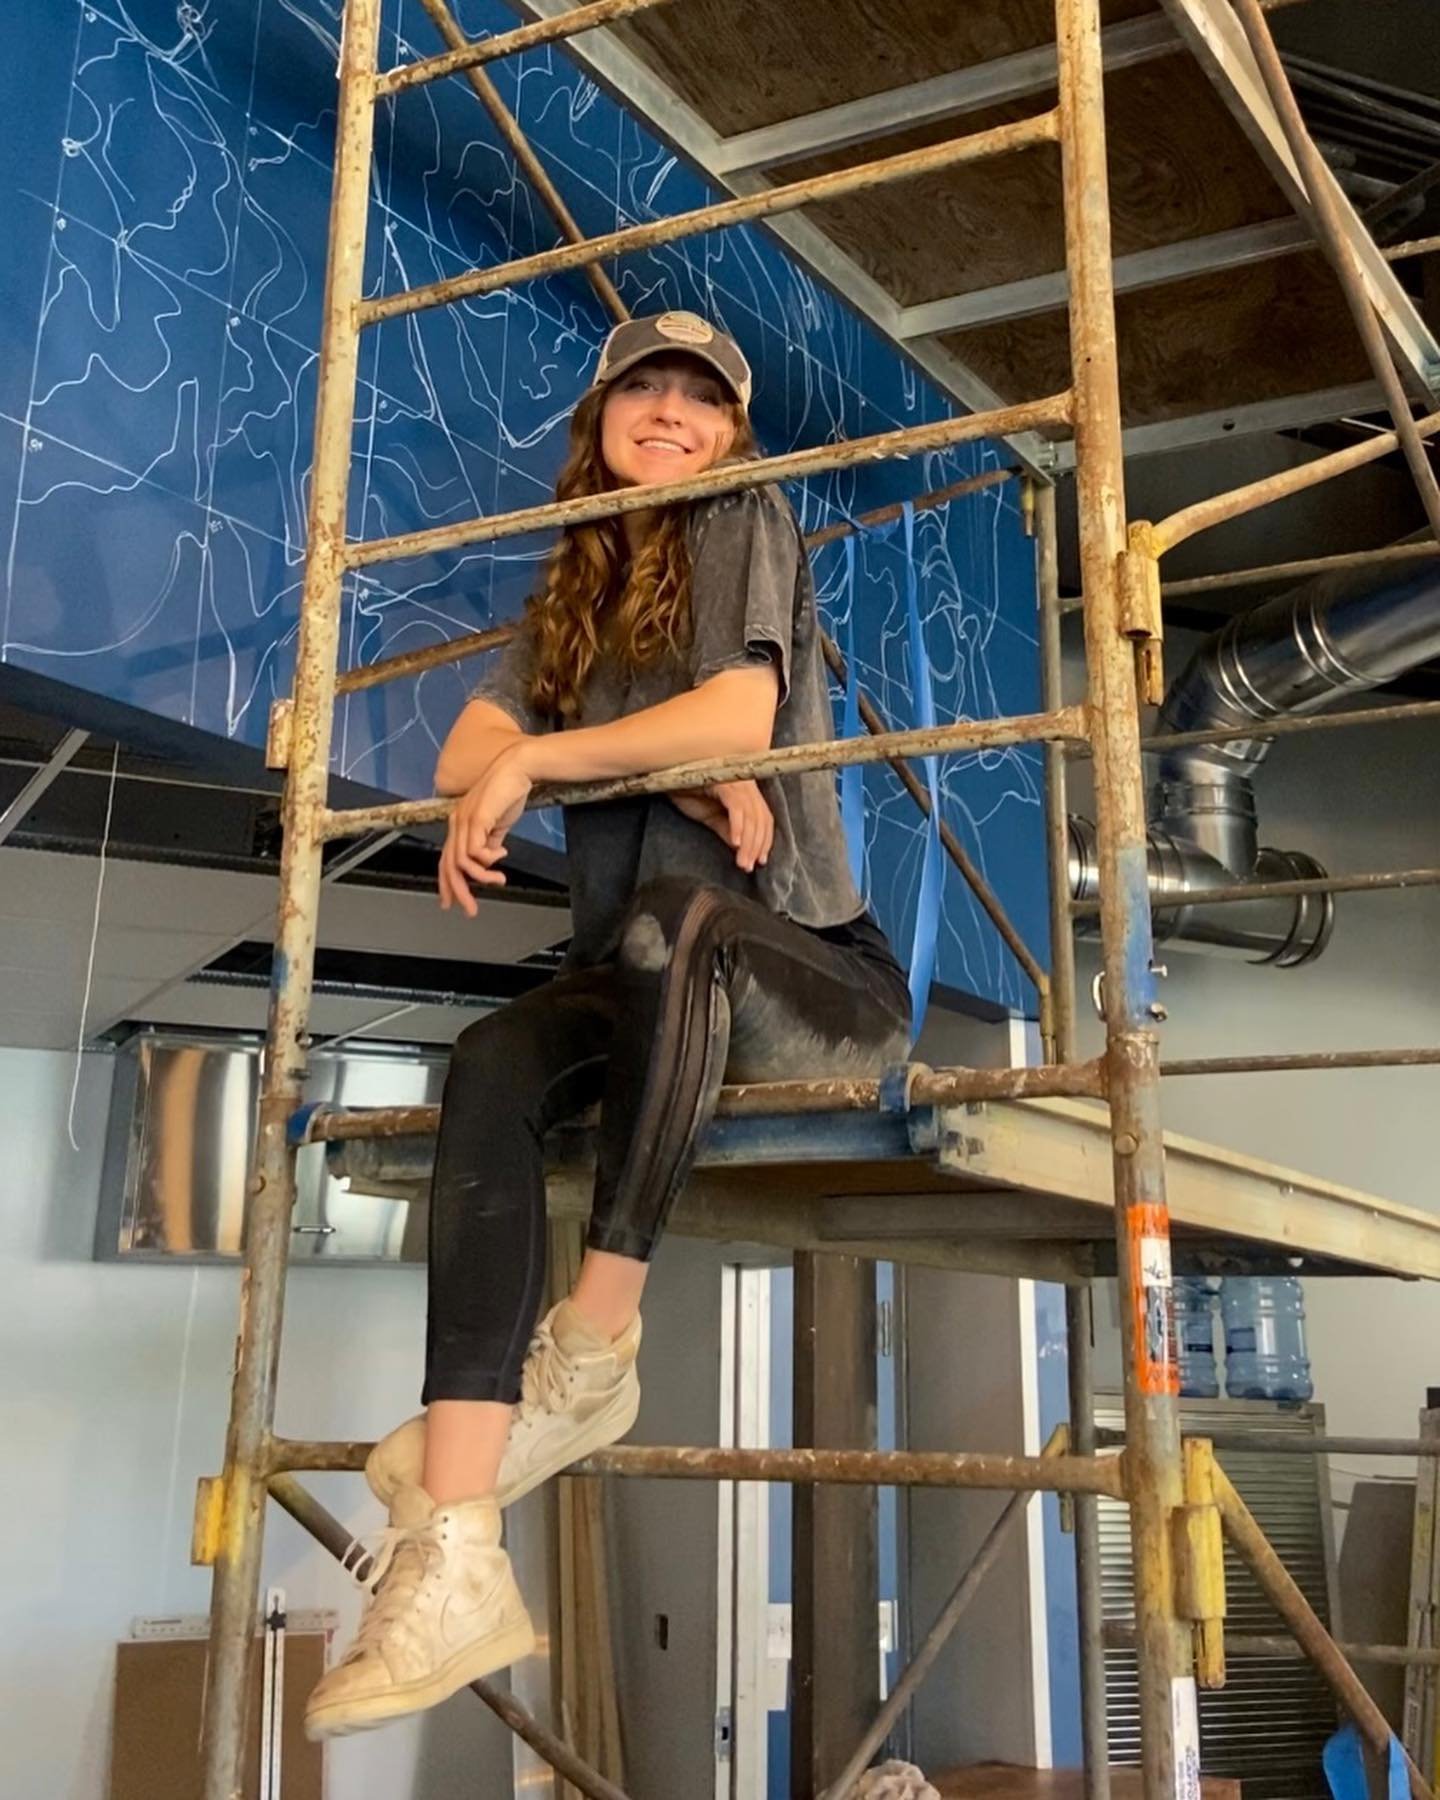 So stoked to be brought in for this mural @flourandbarrelnc. It has been an unexpected gift to meet the many faces behind the scenes and watch this project come together while I work. Life feels charmed lately and I&rsquo;m truly grateful for this op